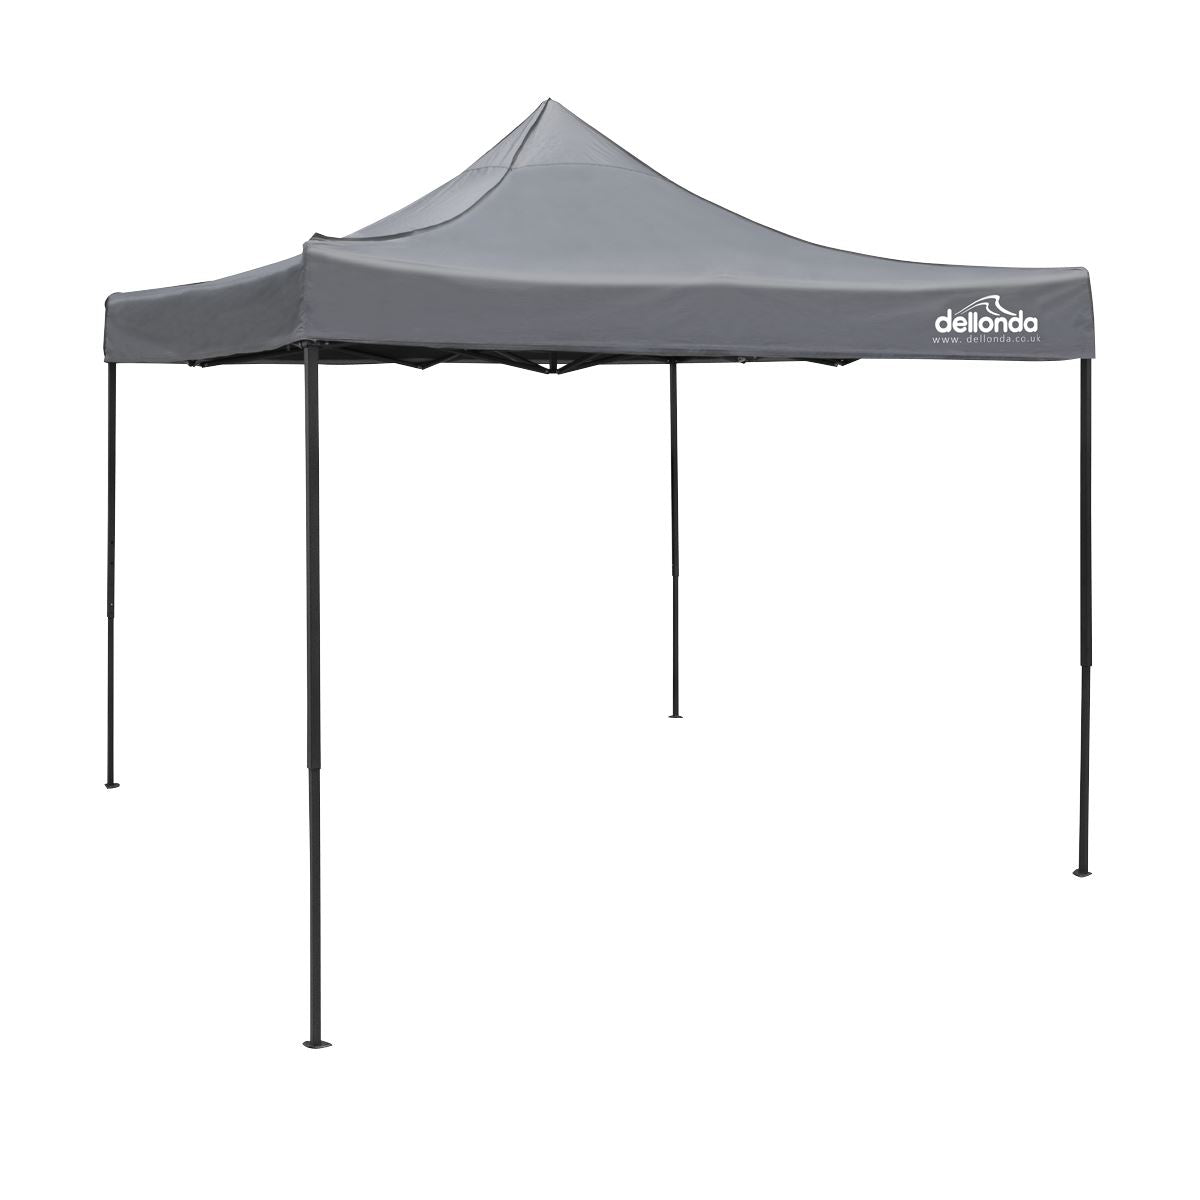 Dellonda Premium 3 x 3m Pop-Up Gazebo, PVC Coated, Water Resistant Fabric, Supplied with Carry Bag, Rope, Stakes & Weight Bags - Grey Canopy